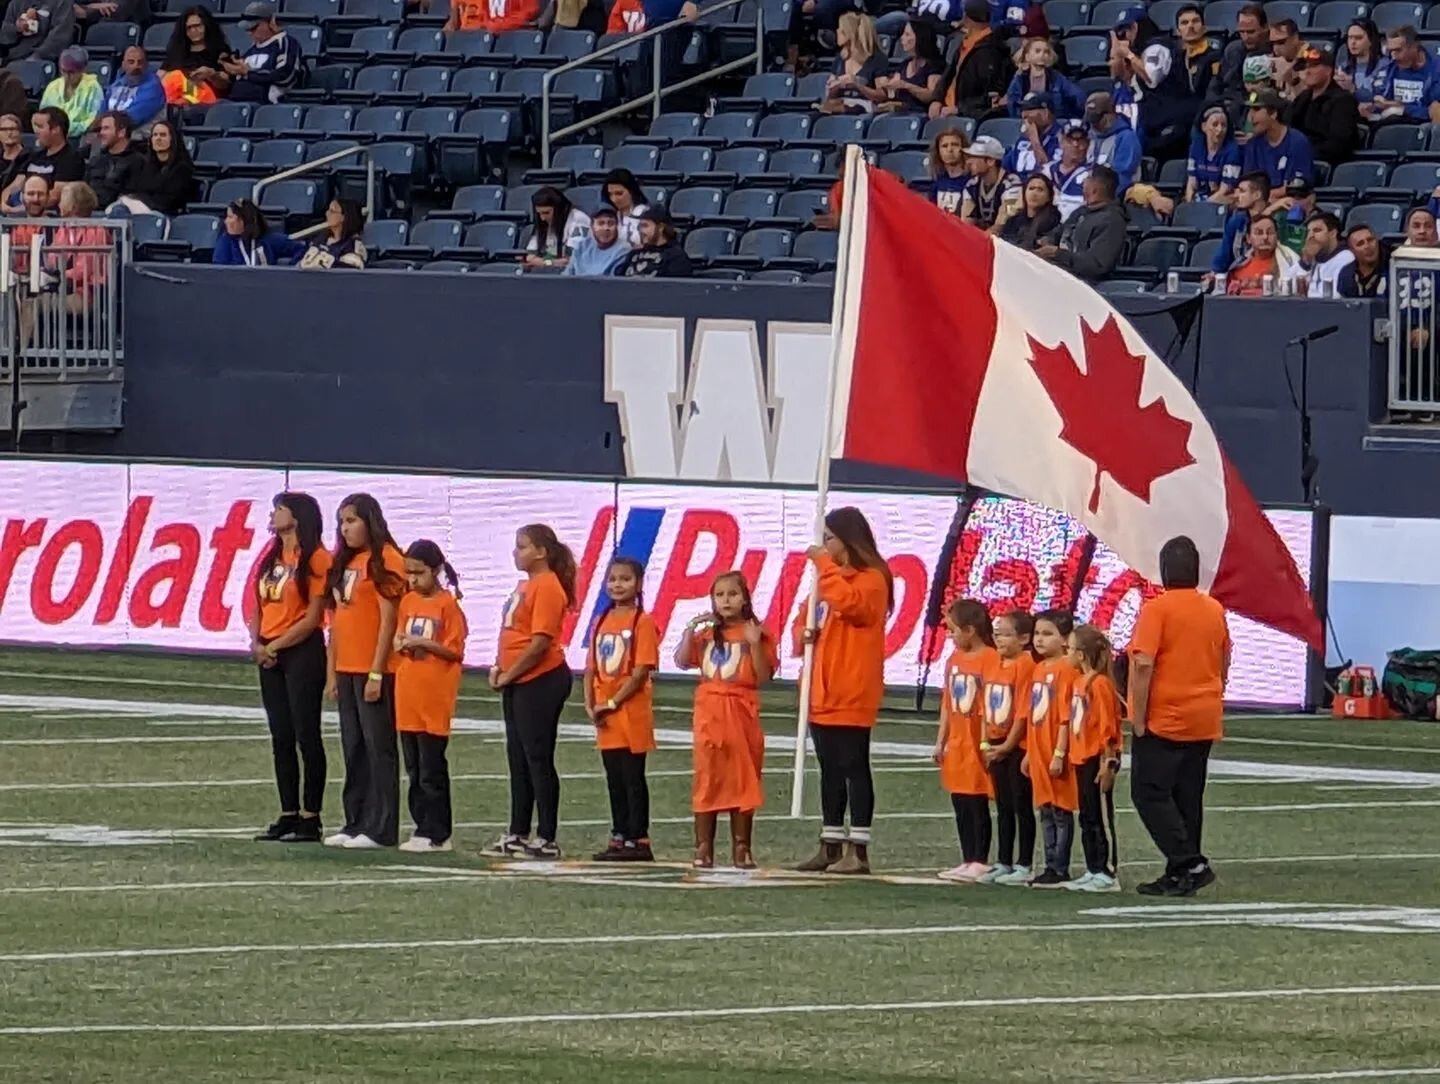 Miigwech @wpgbluebomberscfl for hosting #WASACYouth at Truth And Reconciliation Game 🧡 We&rsquo;ll wear our shirts proudly #OrangeShirtDay #ForTheW